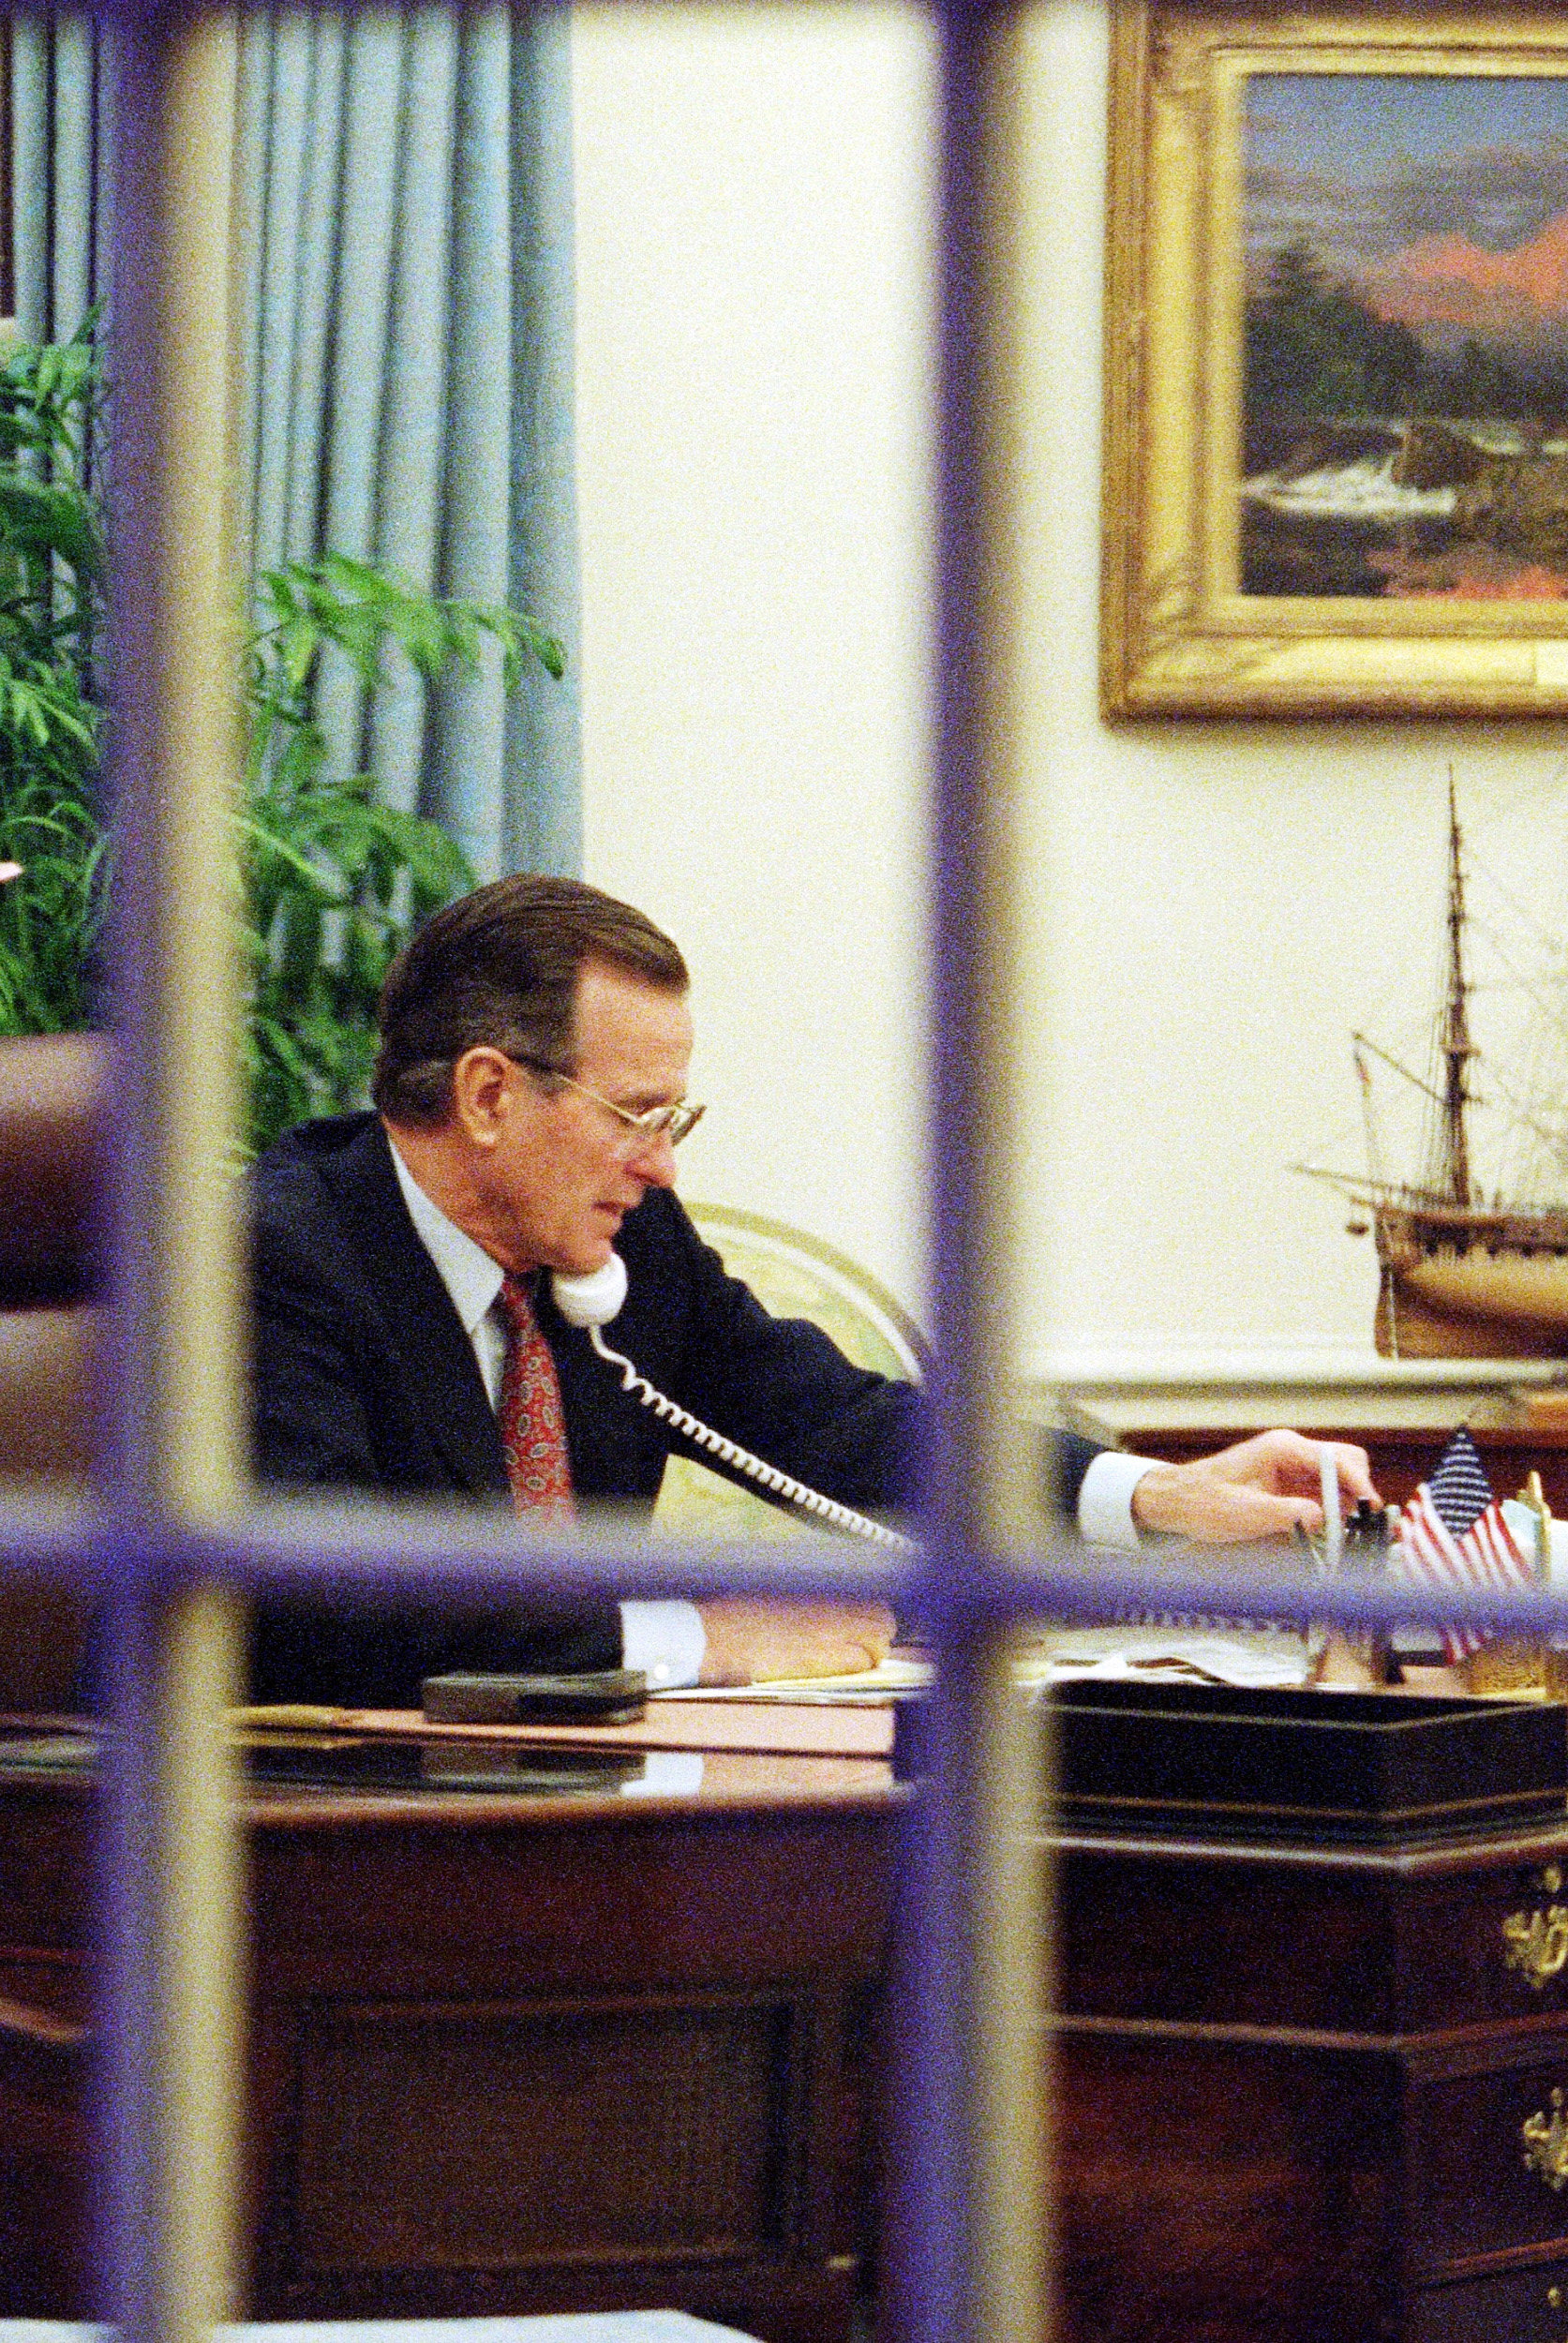 US President George H. W. Bush works in the White House Oval office on January 17, 1991 as Operation Desert Storm continues in an attempt by the United States and its allies to force the Iraqis to leave Kuwait. Photo: AFP